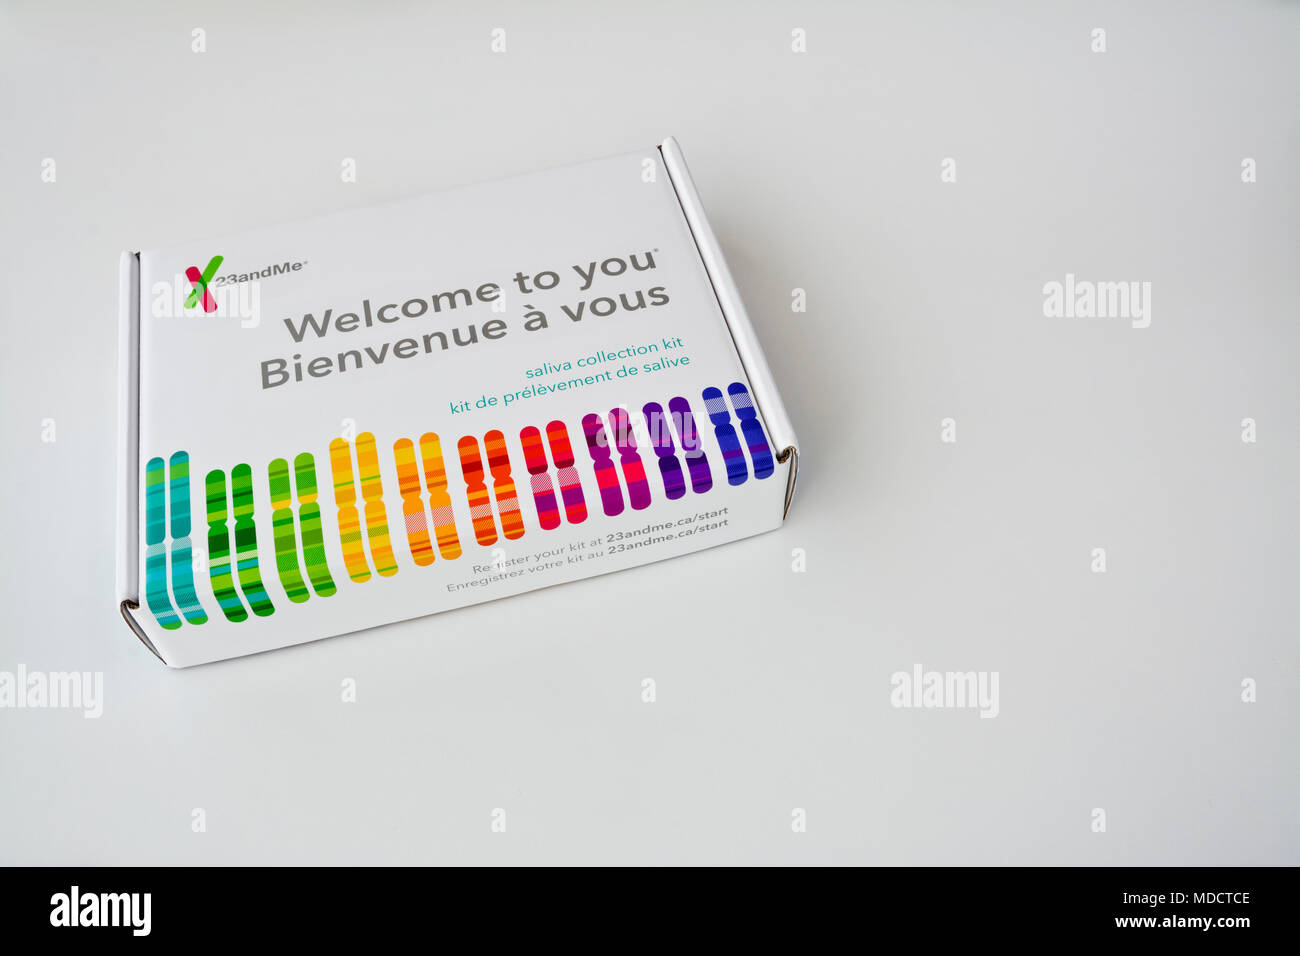 23andme home DNA test kit.  Box containing DNA testing kit by 23andme. Stock Photo